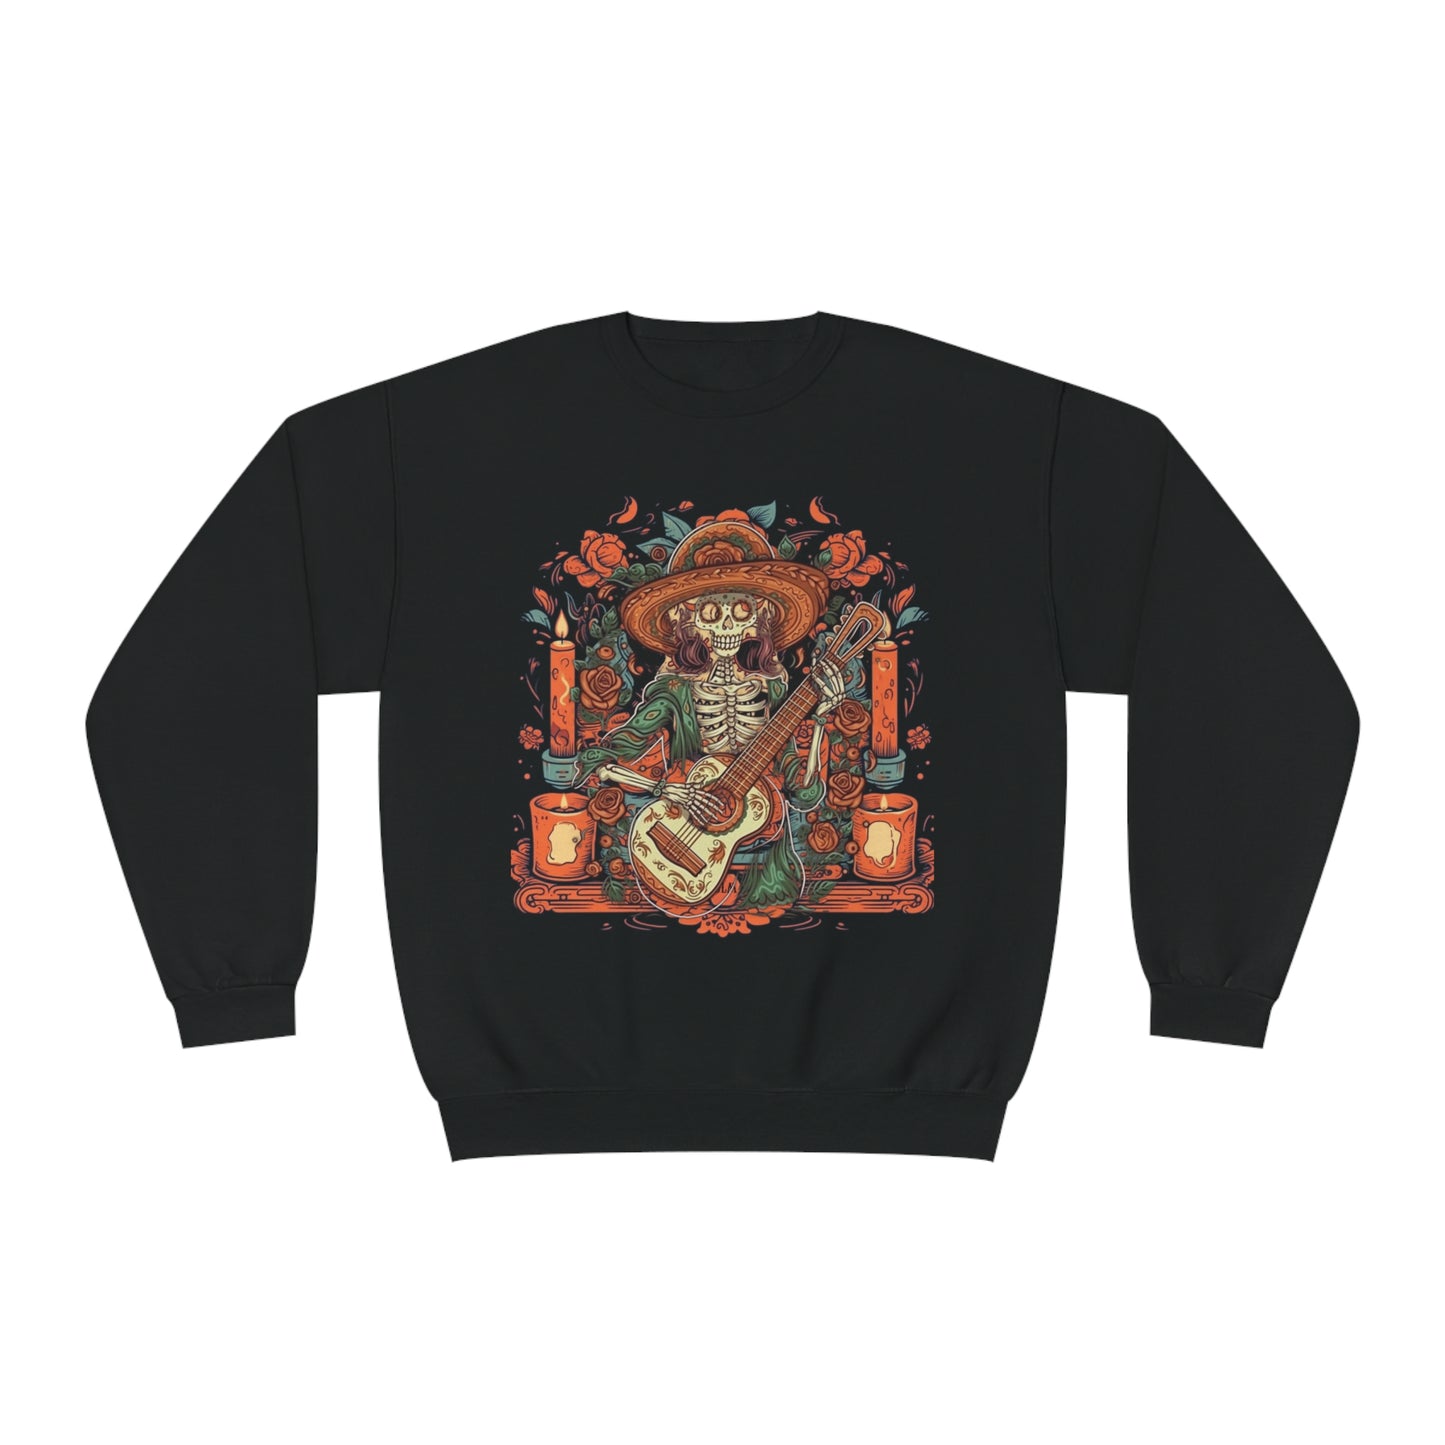 Lady of Music Day of the Dead Colorful Guitar Skeleton Unisex Pullover Sweater by Casita De Los Muertos